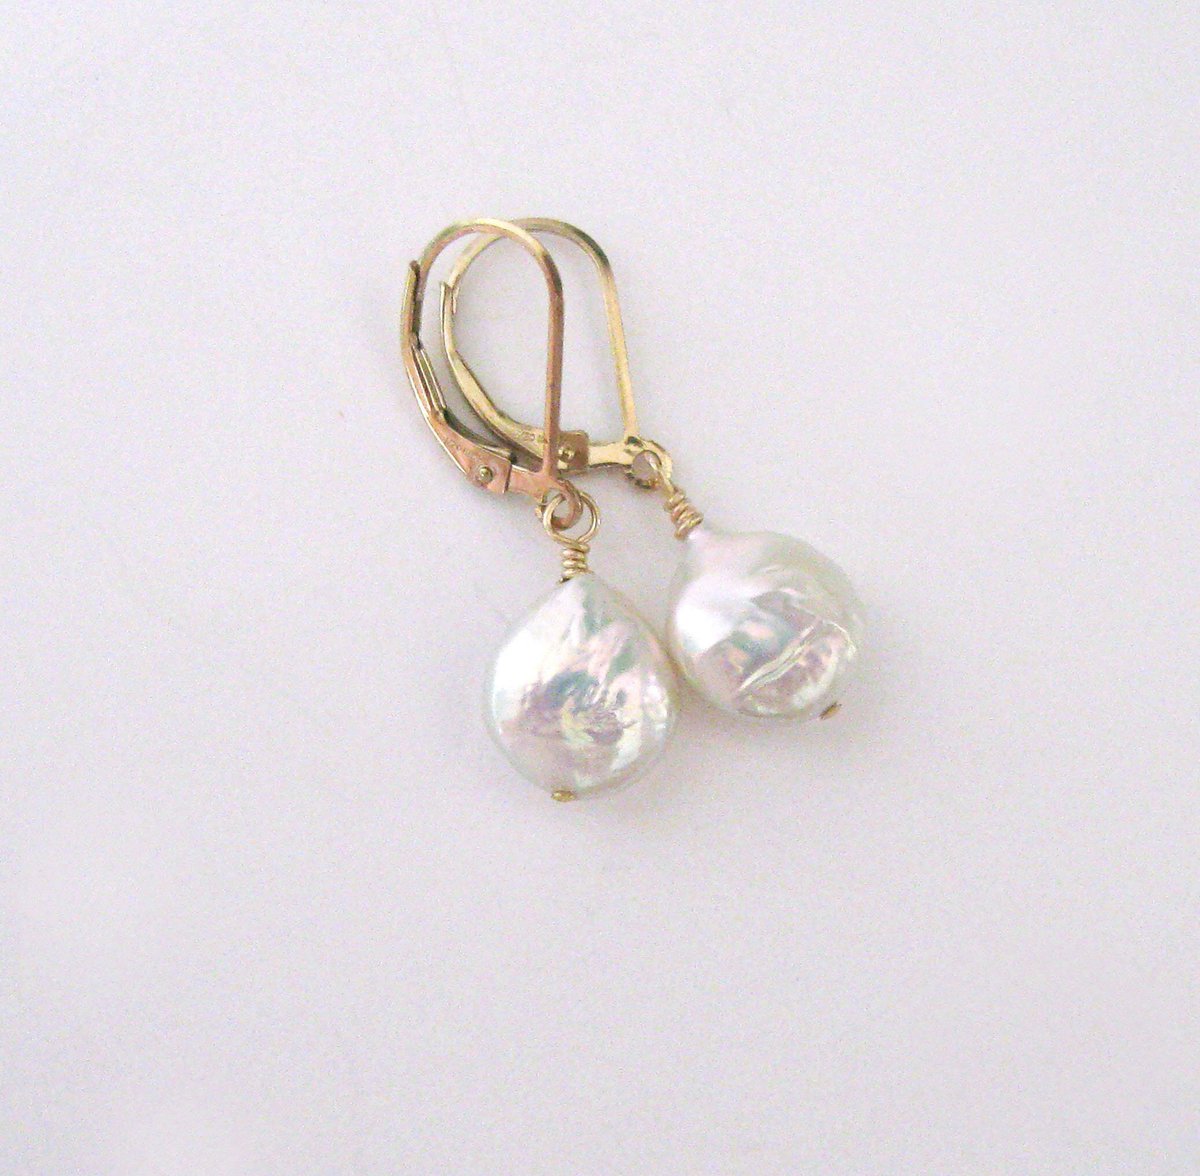 White Cream Baroque Coin Pearl Goldfilled Leverback Earrings, Freshwater Pearls with Pastel Iridescence tuppu.net/d99d5aac #Etsy #SendingLoveGallery #Sendinglovegallery